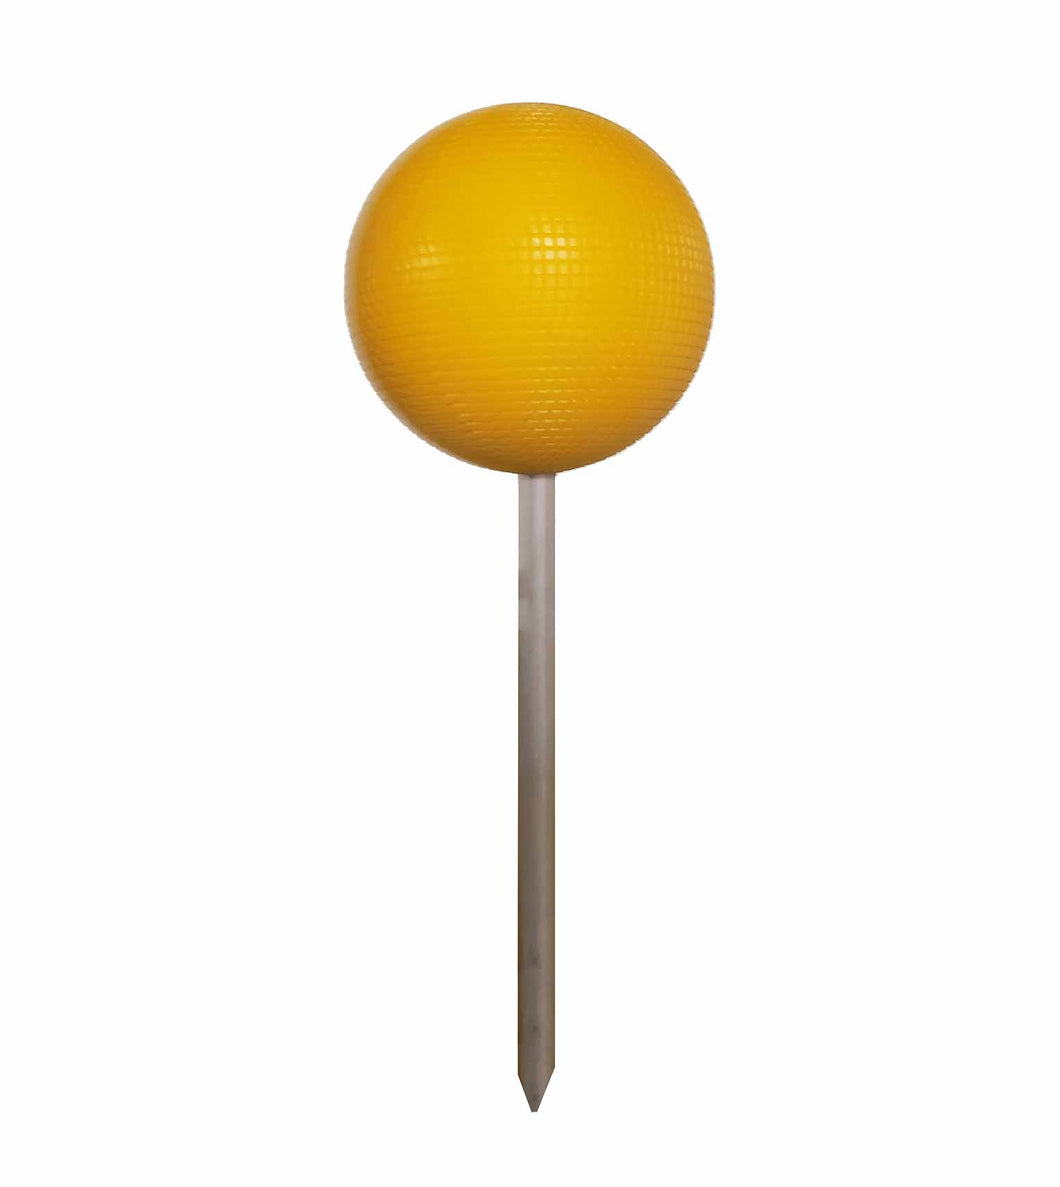 Croquet target ball for practice play